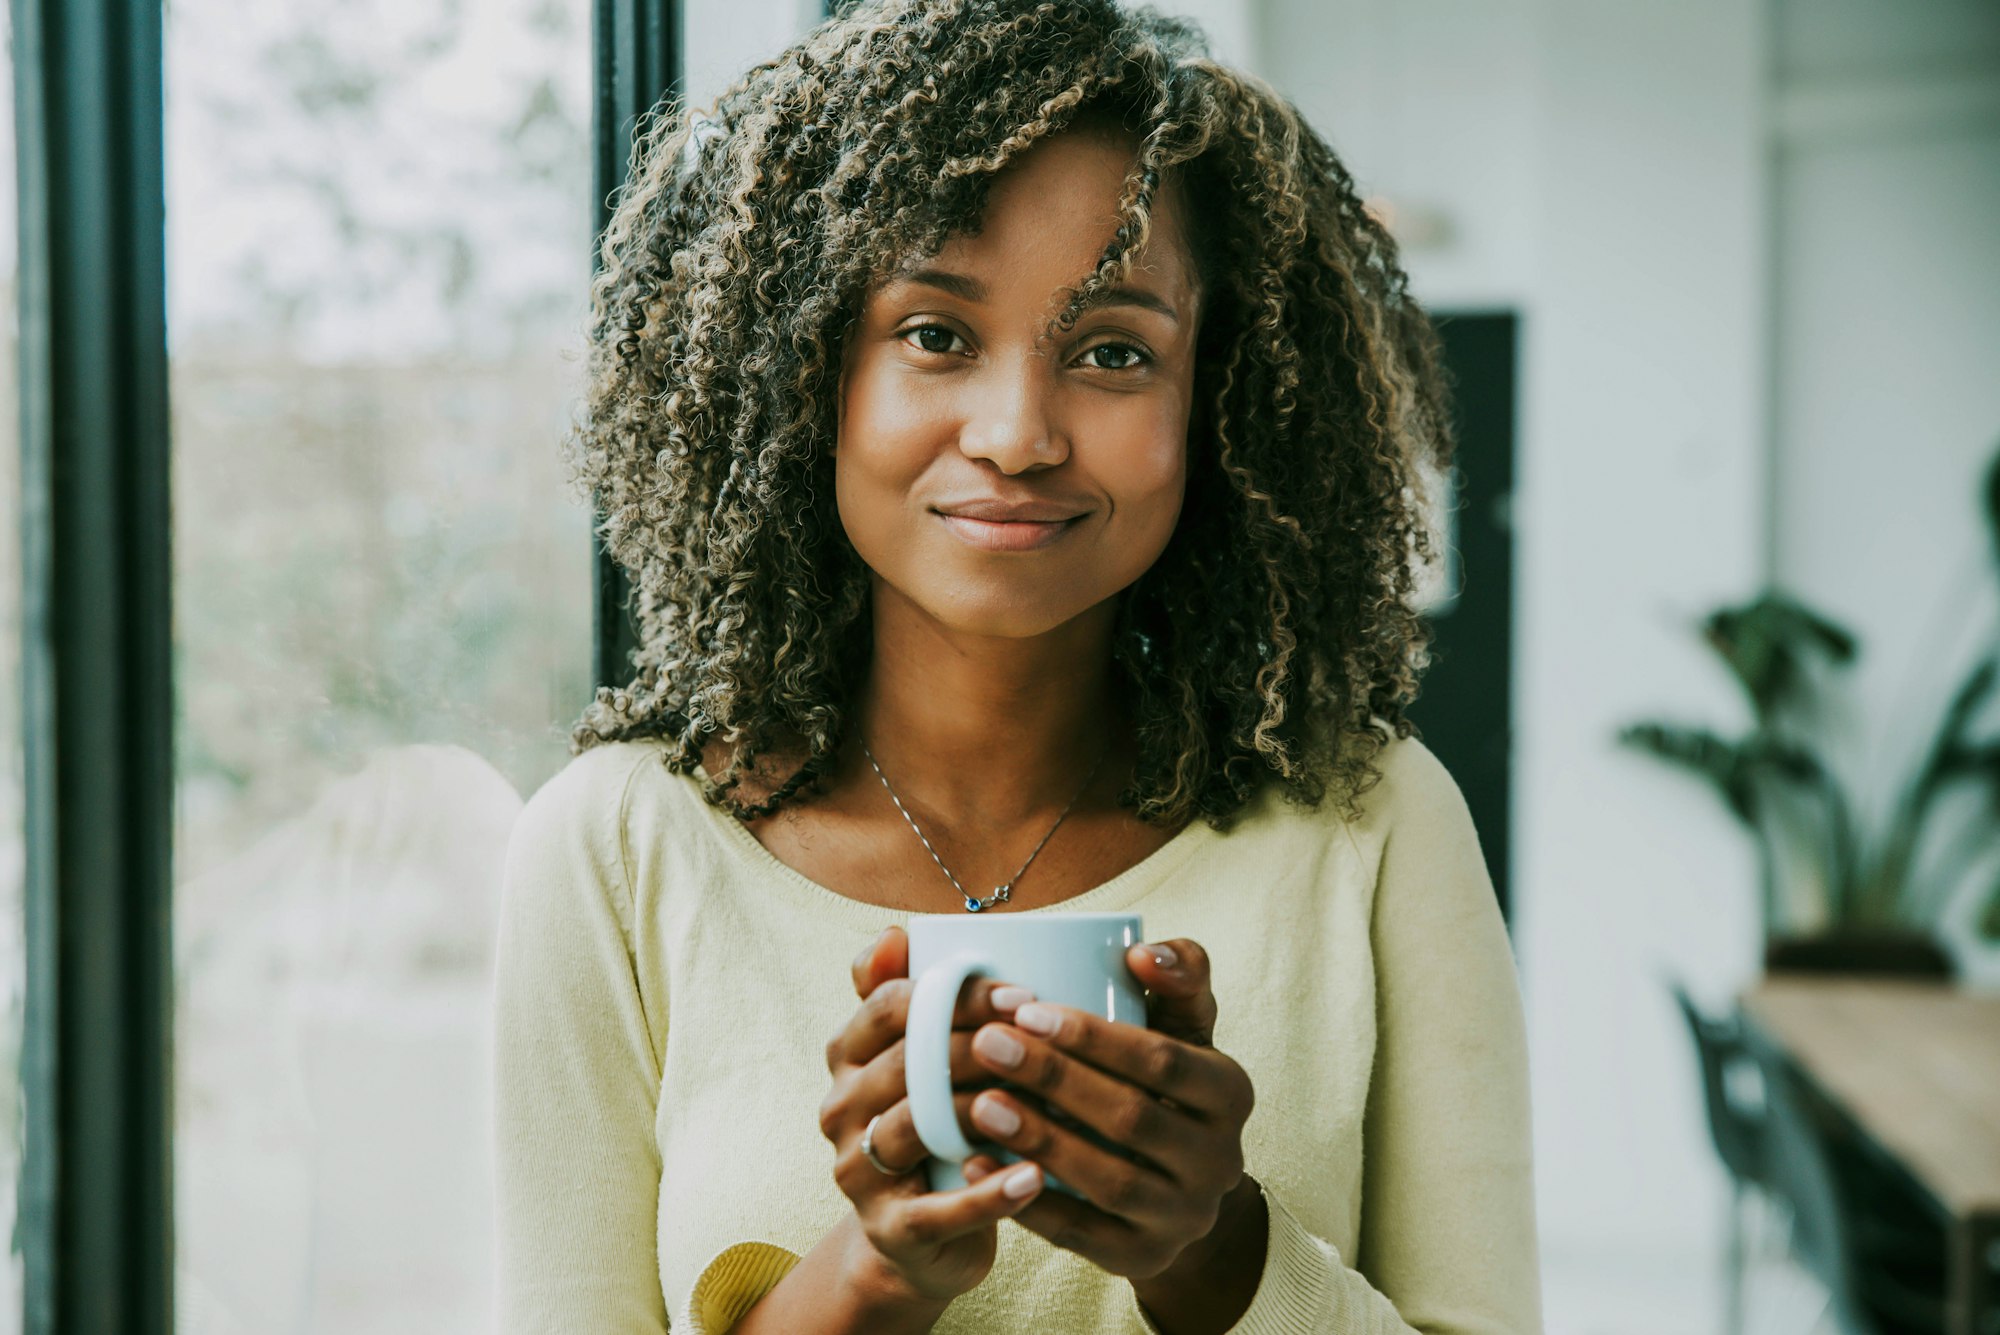 Portrait of young black woman holding cup of tea looking at camera